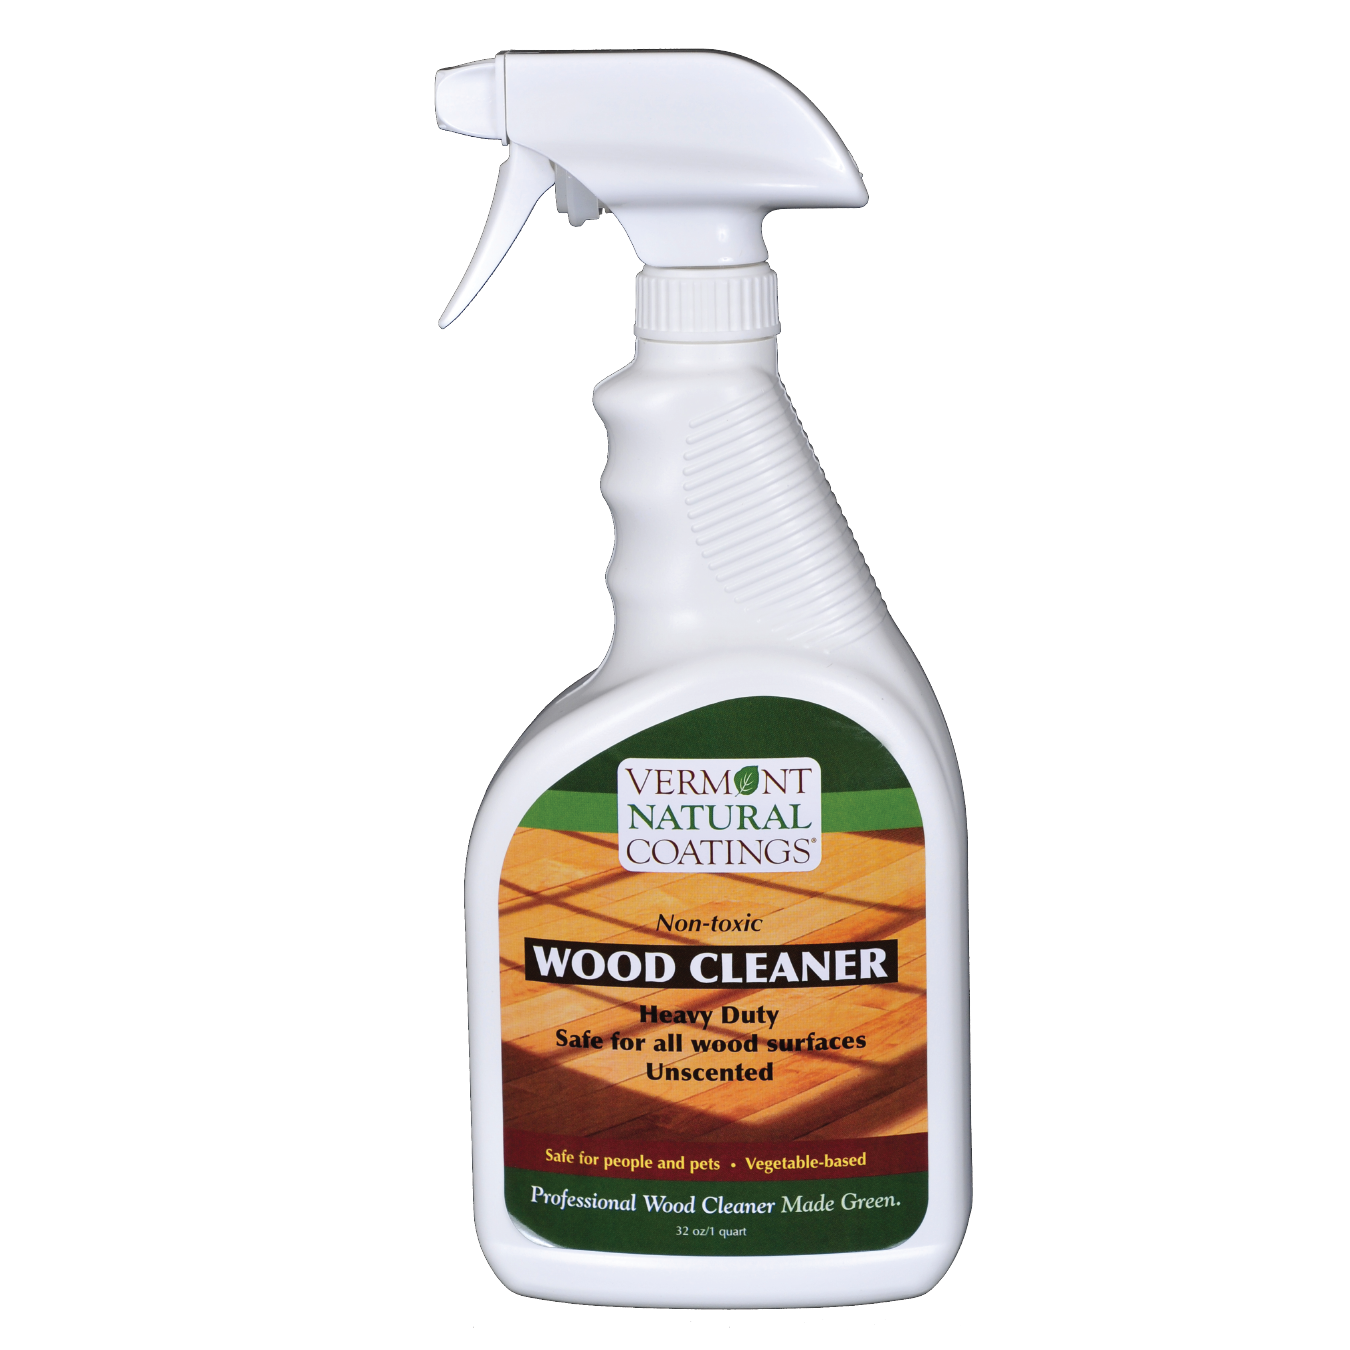 Free wood cleaning product samples